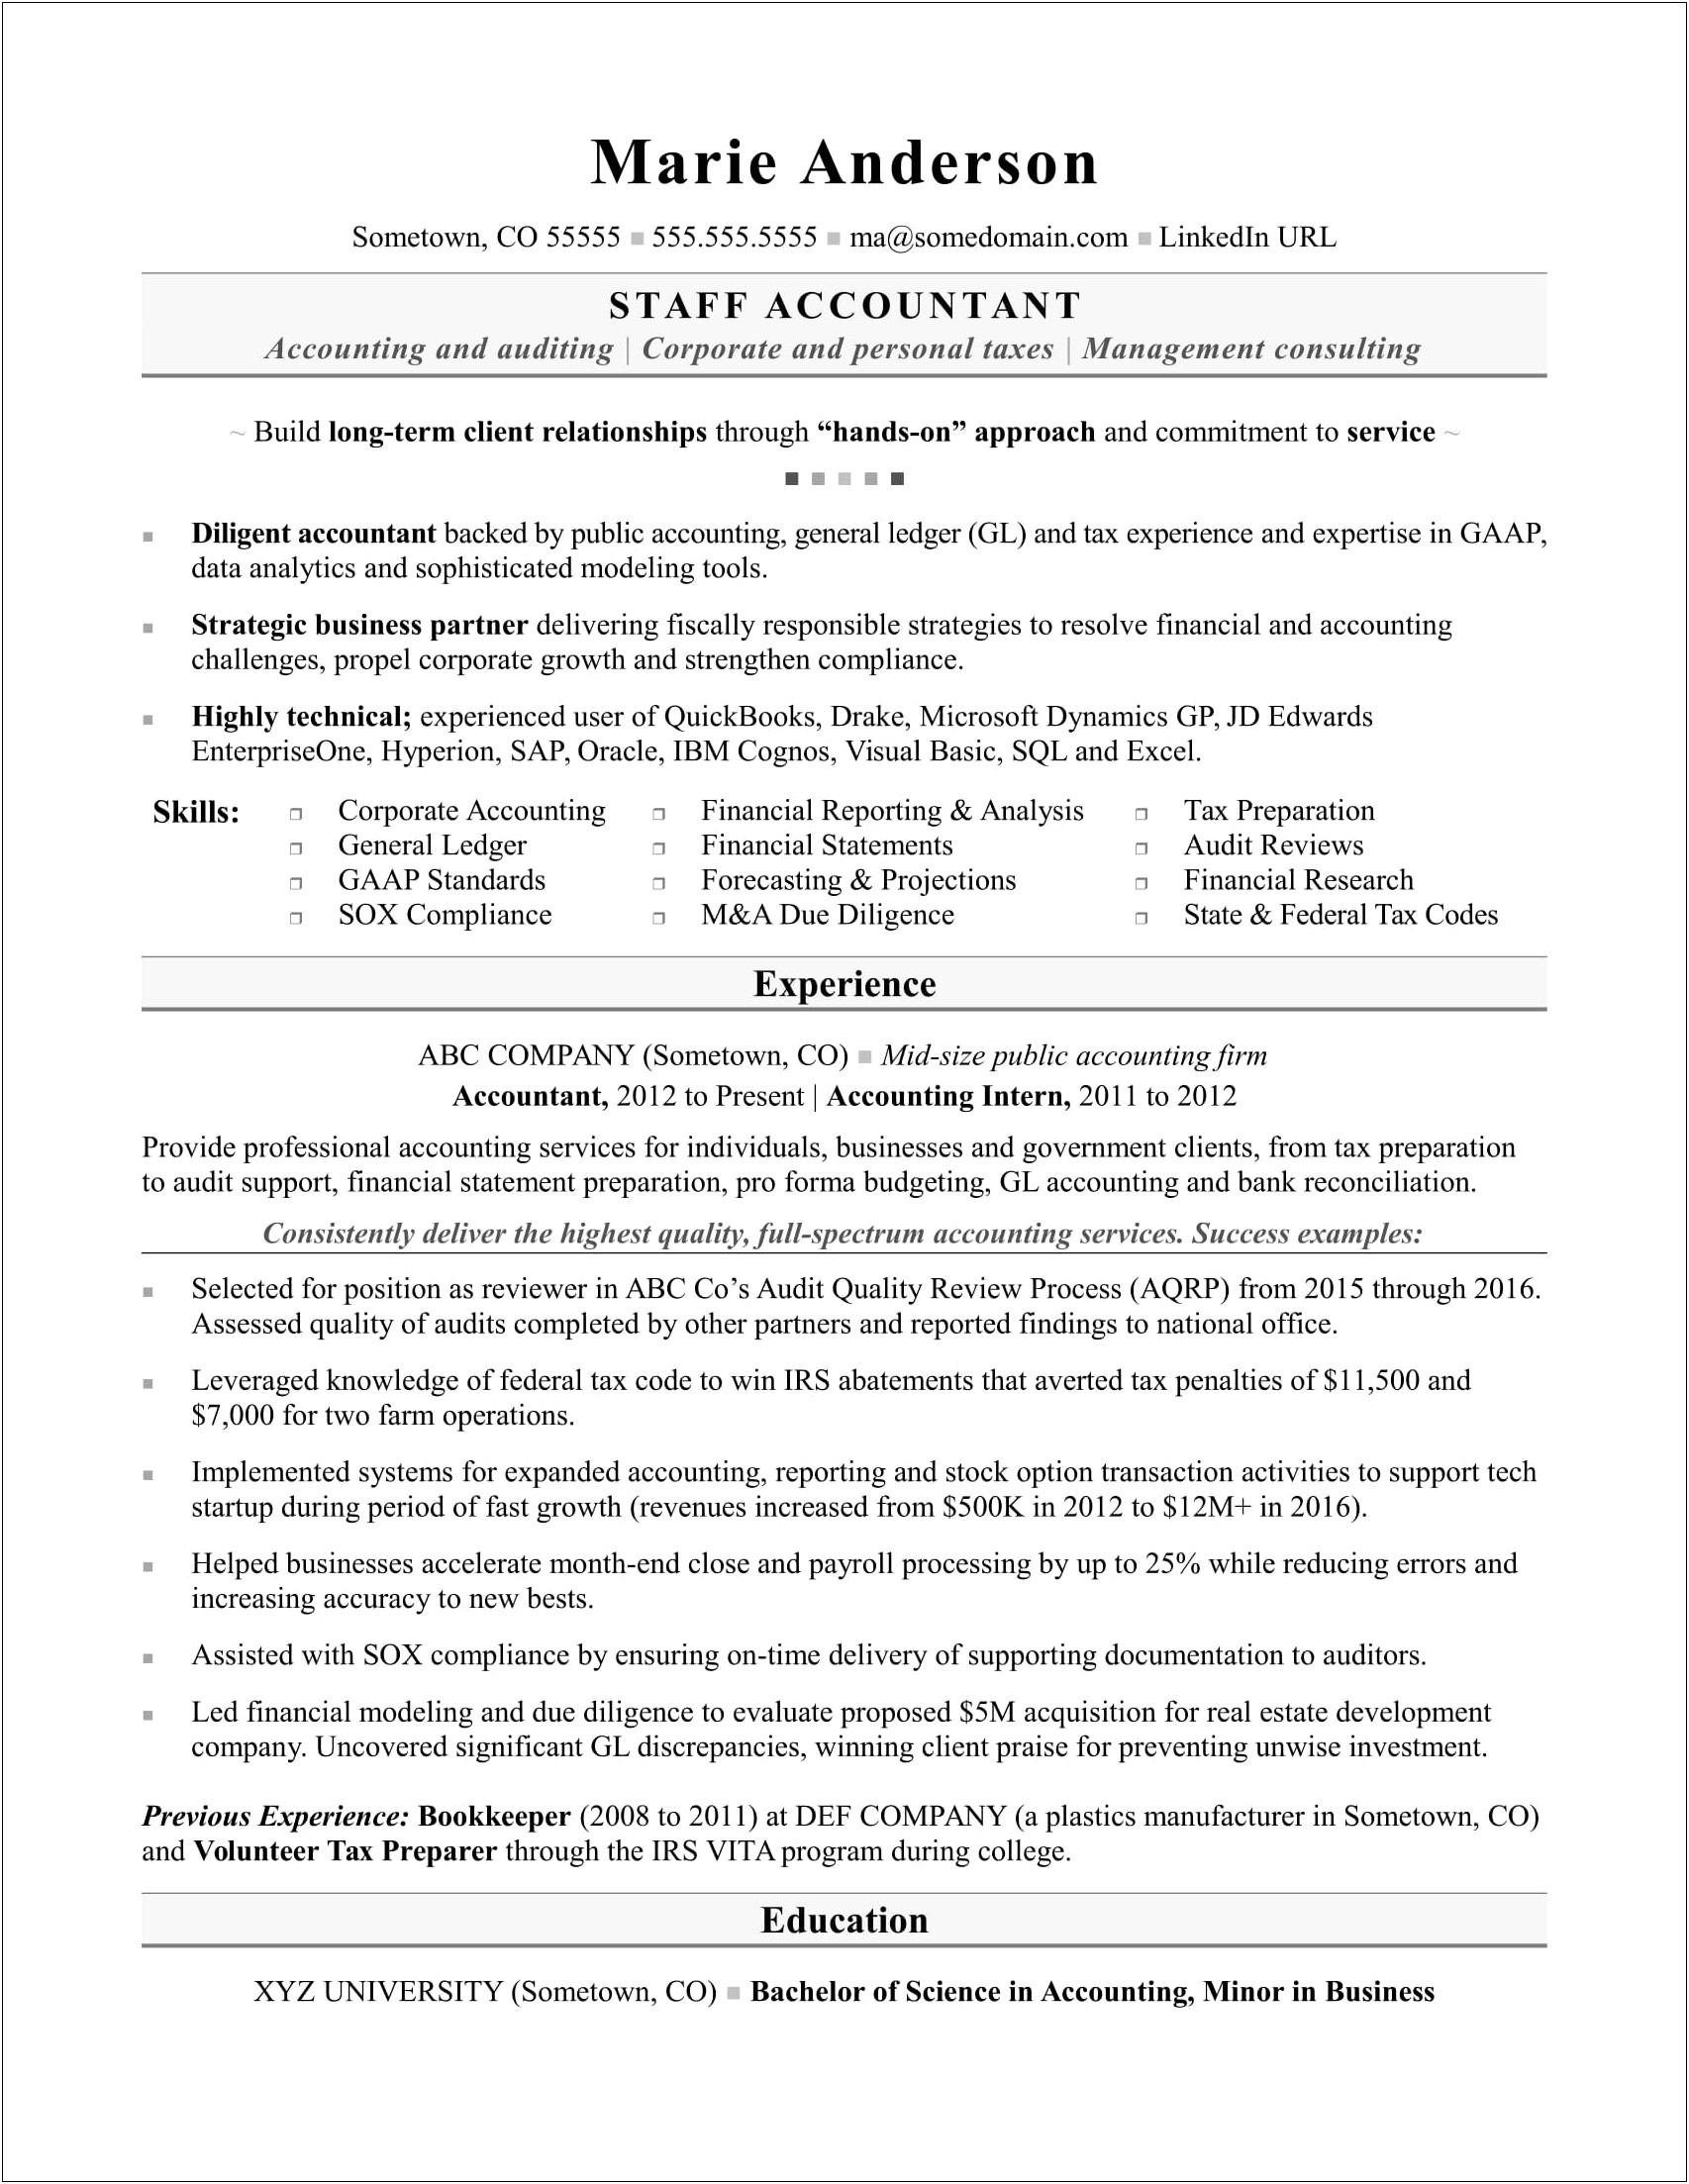 Resume Objective To Get A Job In Accounting